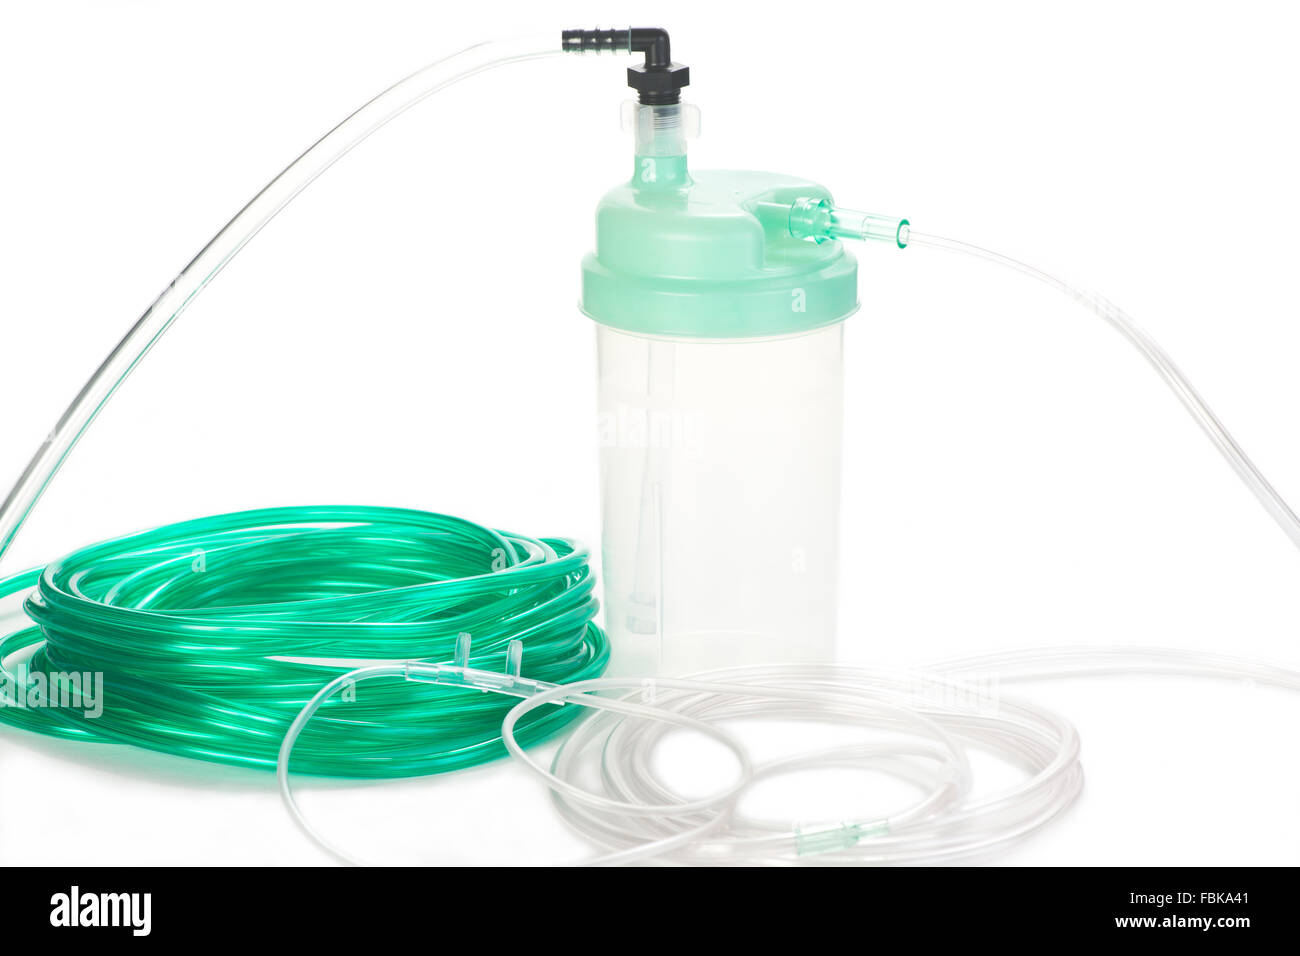 Oxygen therapy system humidifier bottle with green oxygen tubing and nasal cannula. Stock Photo